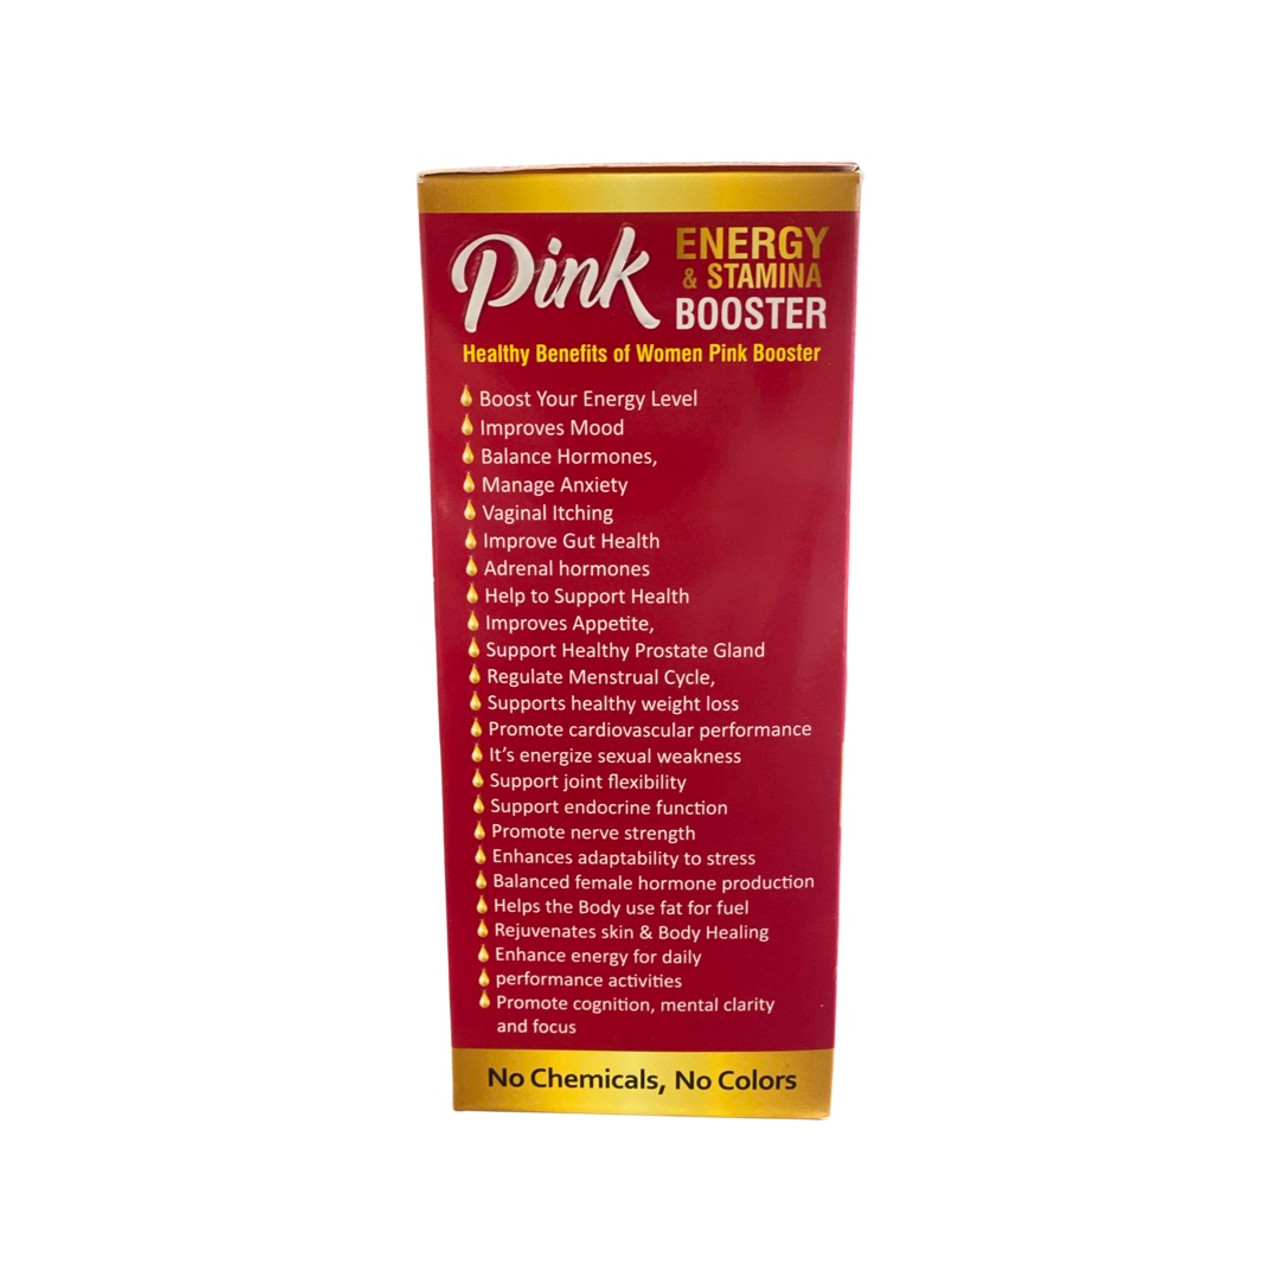 Pink Energy & Stamina Booster 8 Fl oz | Essential Palace